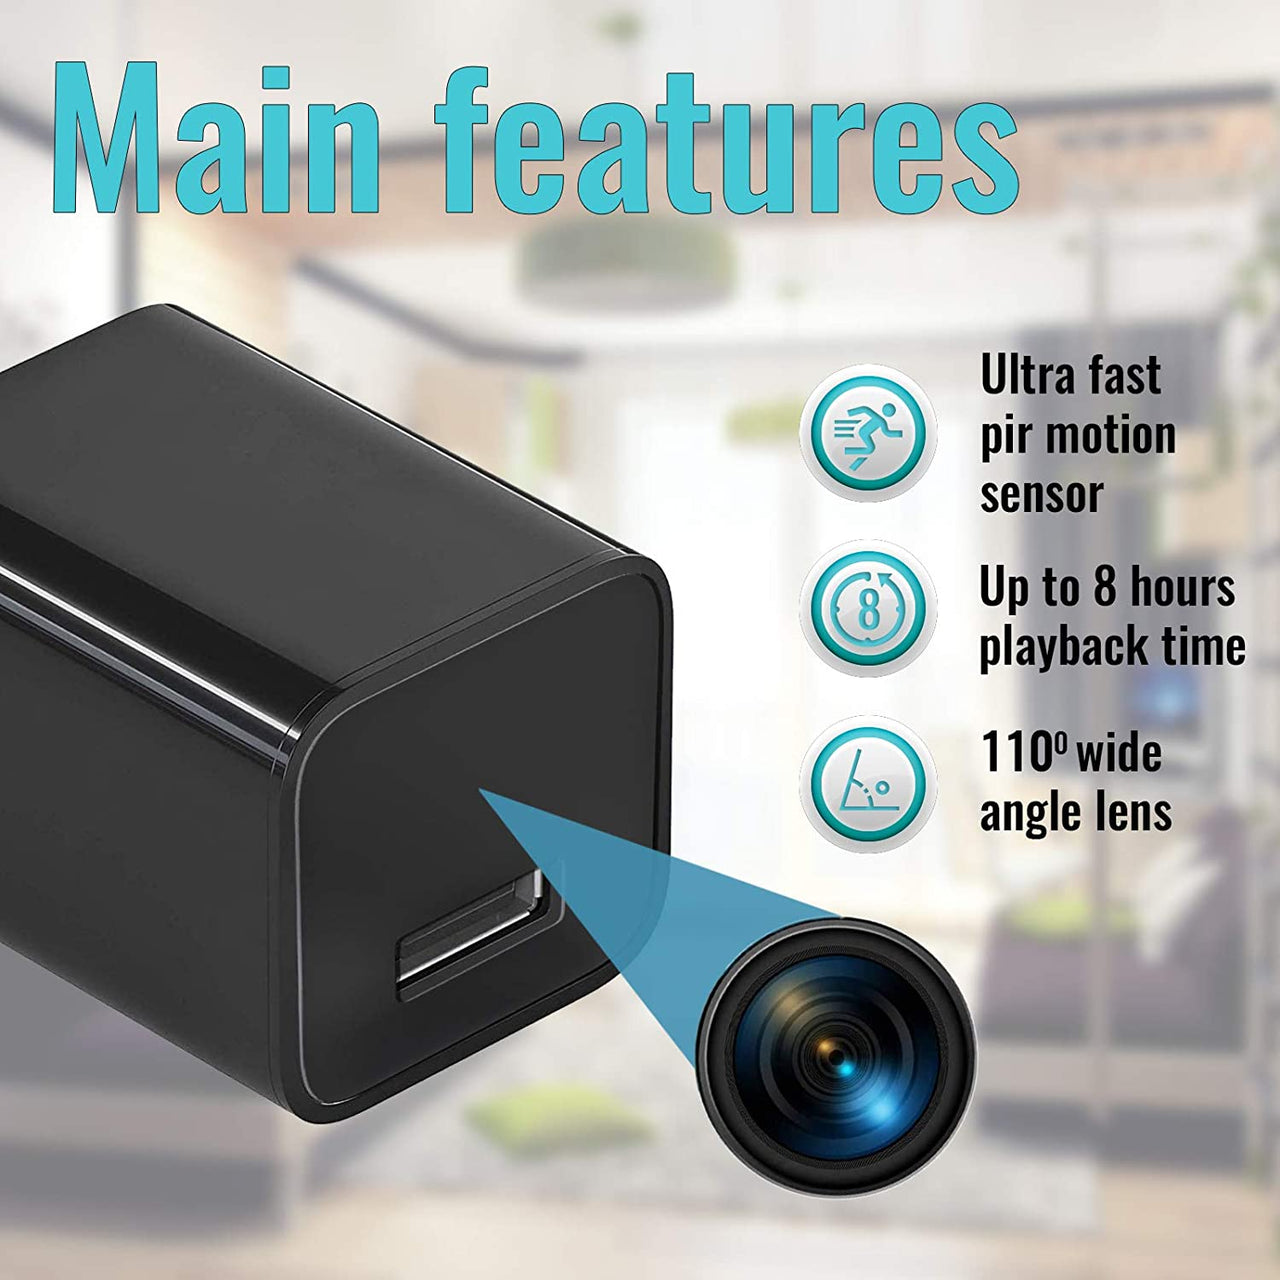 Dual Purpose USB Charger Camera - thedealzninja